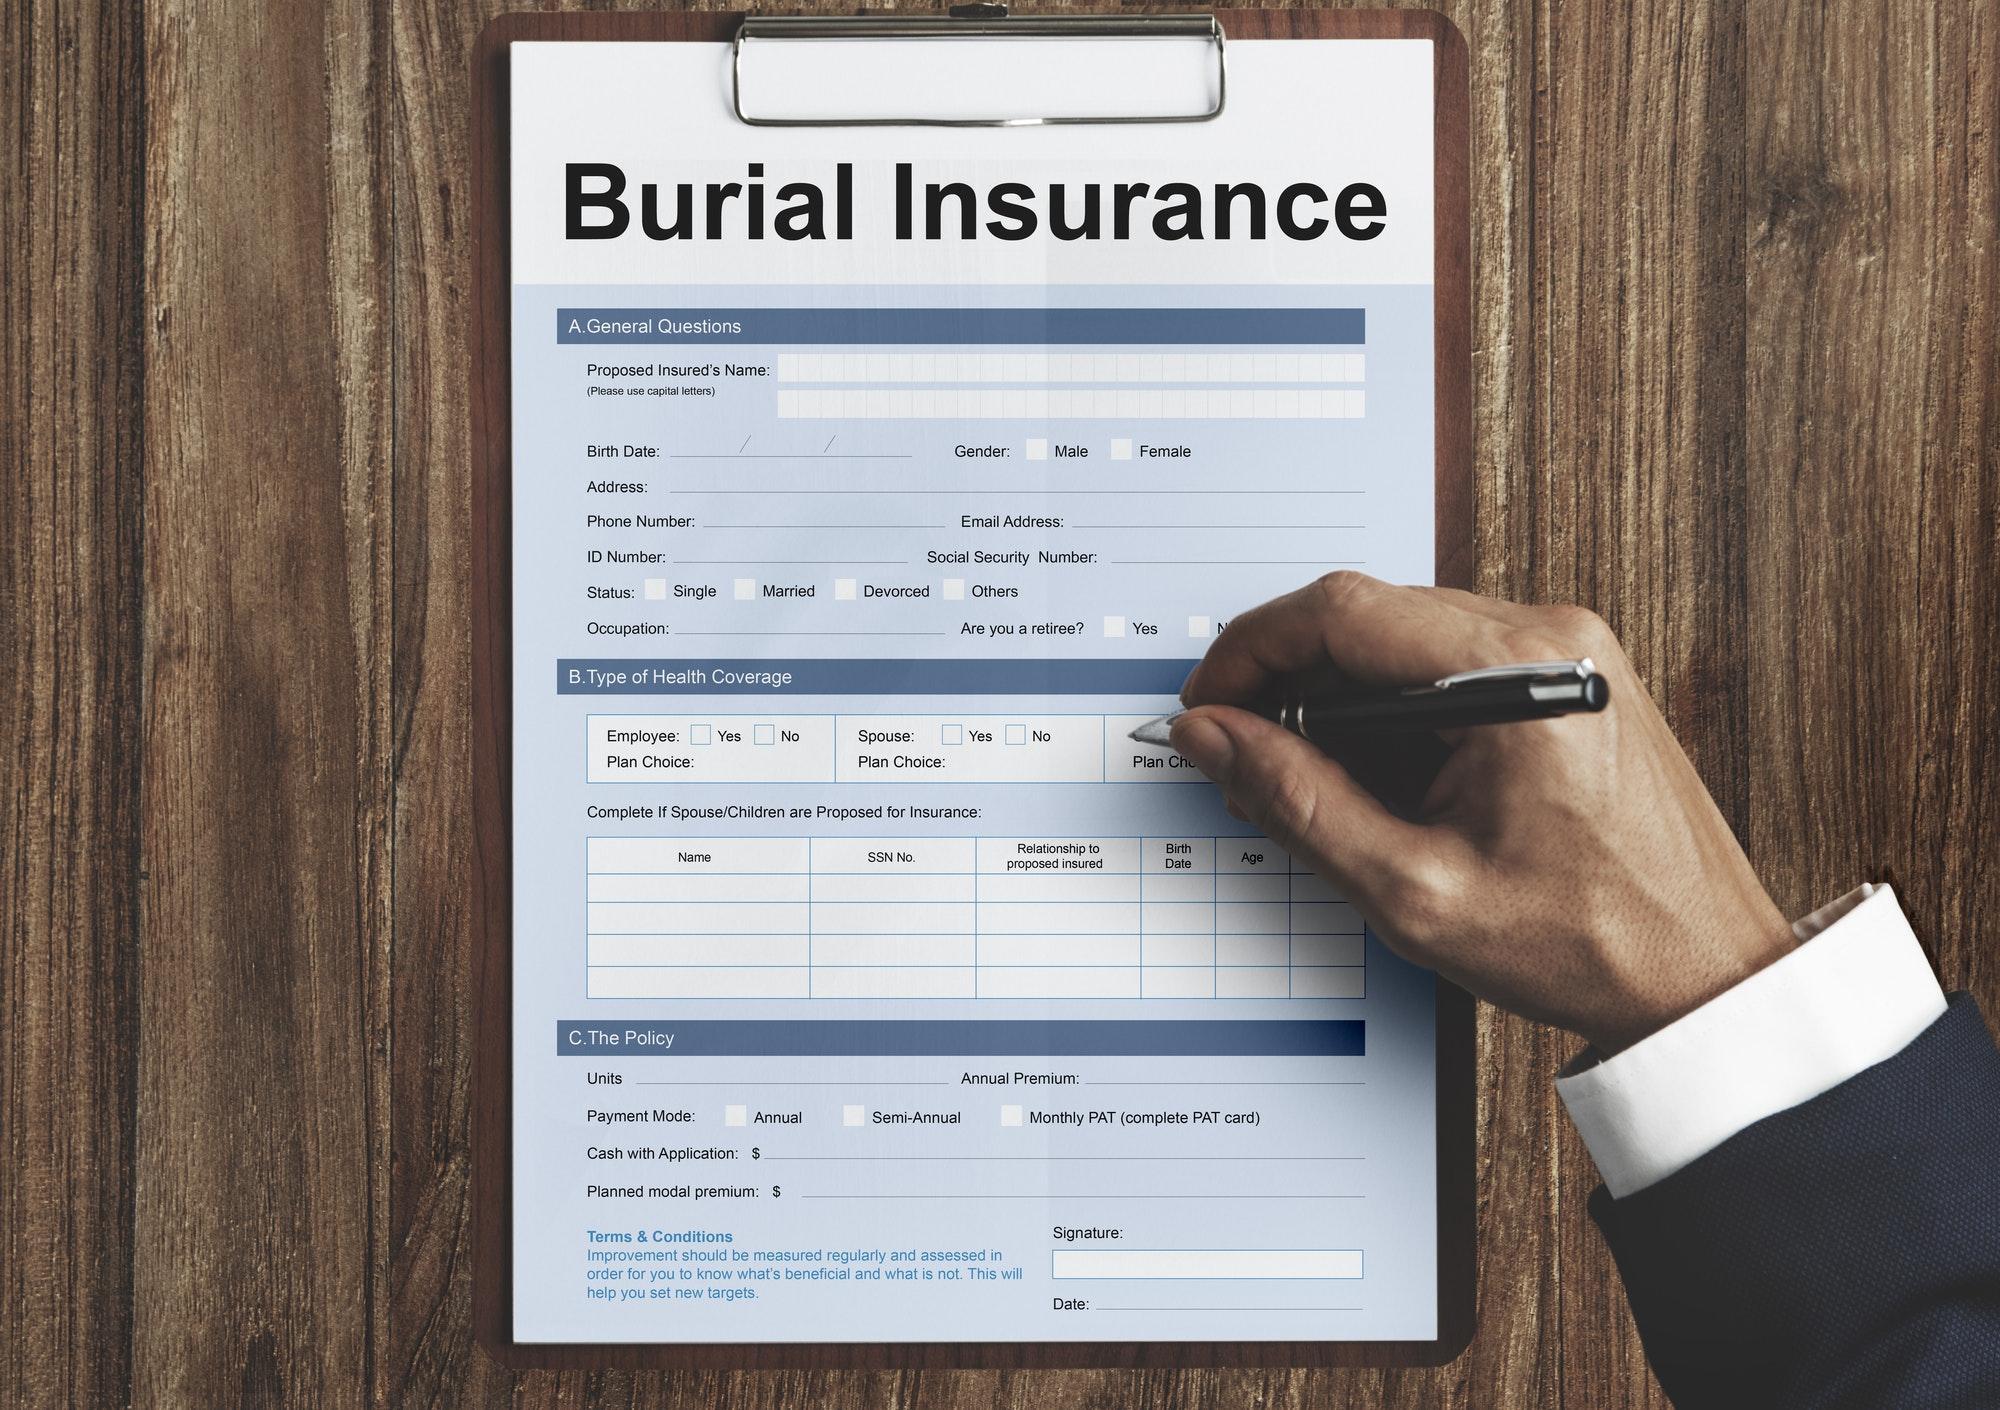 Burial Insurance Form Policy Concept